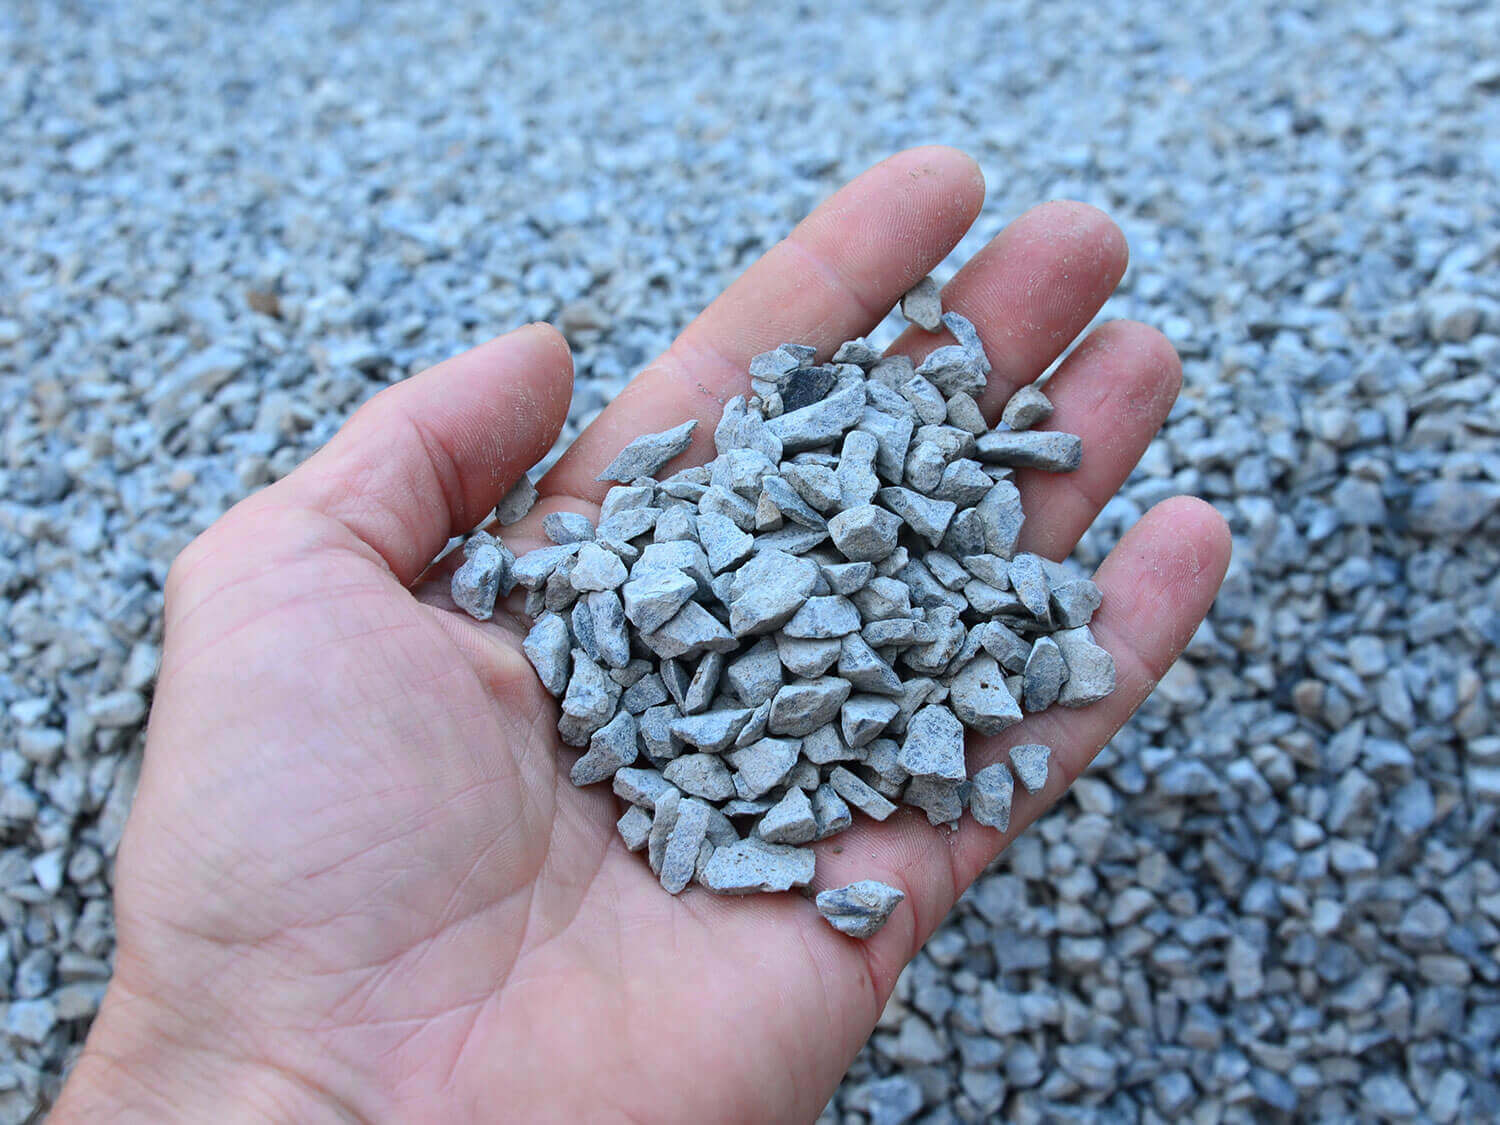 Man's hand holding a handful of crushed stone